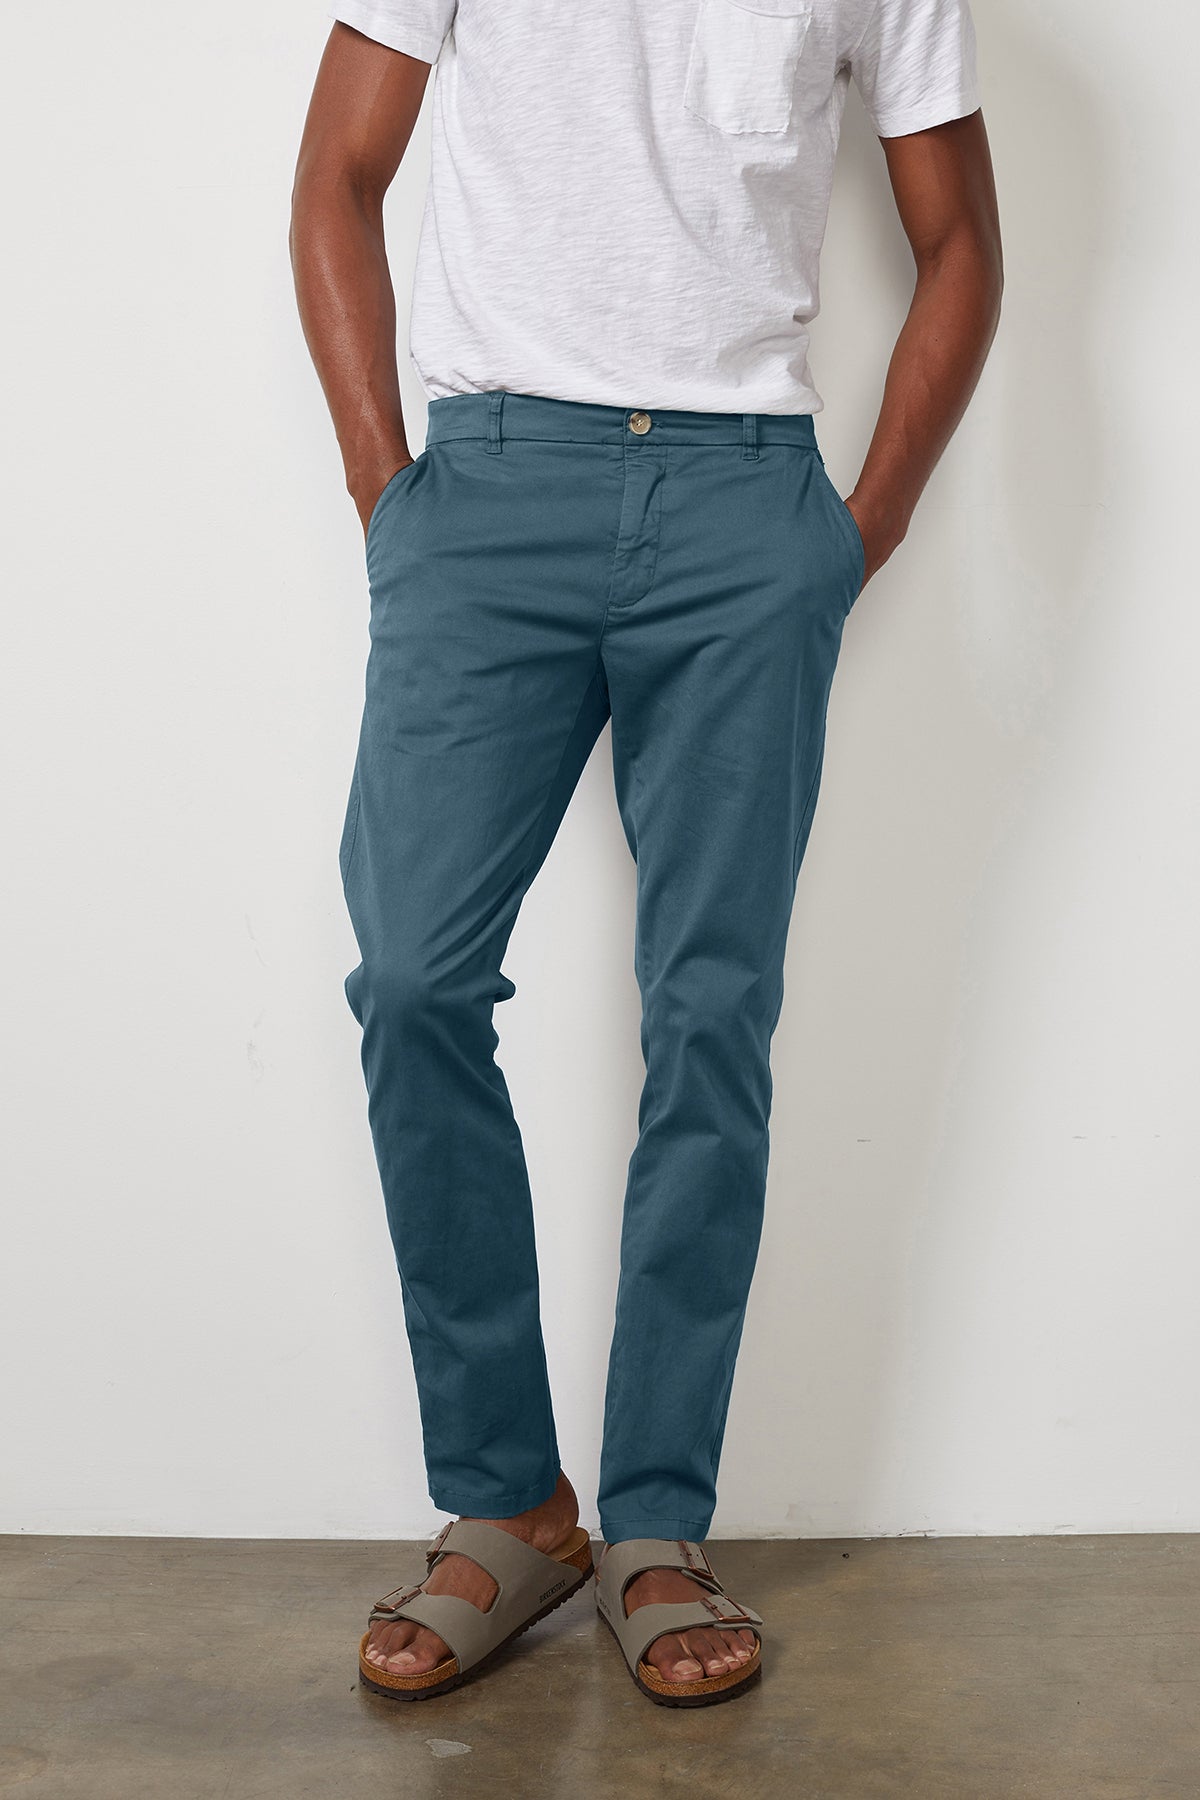 A man wearing Velvet by Graham & Spencer's BROGAN COTTON TWILL PANT and a white t-shirt.-7950524940369